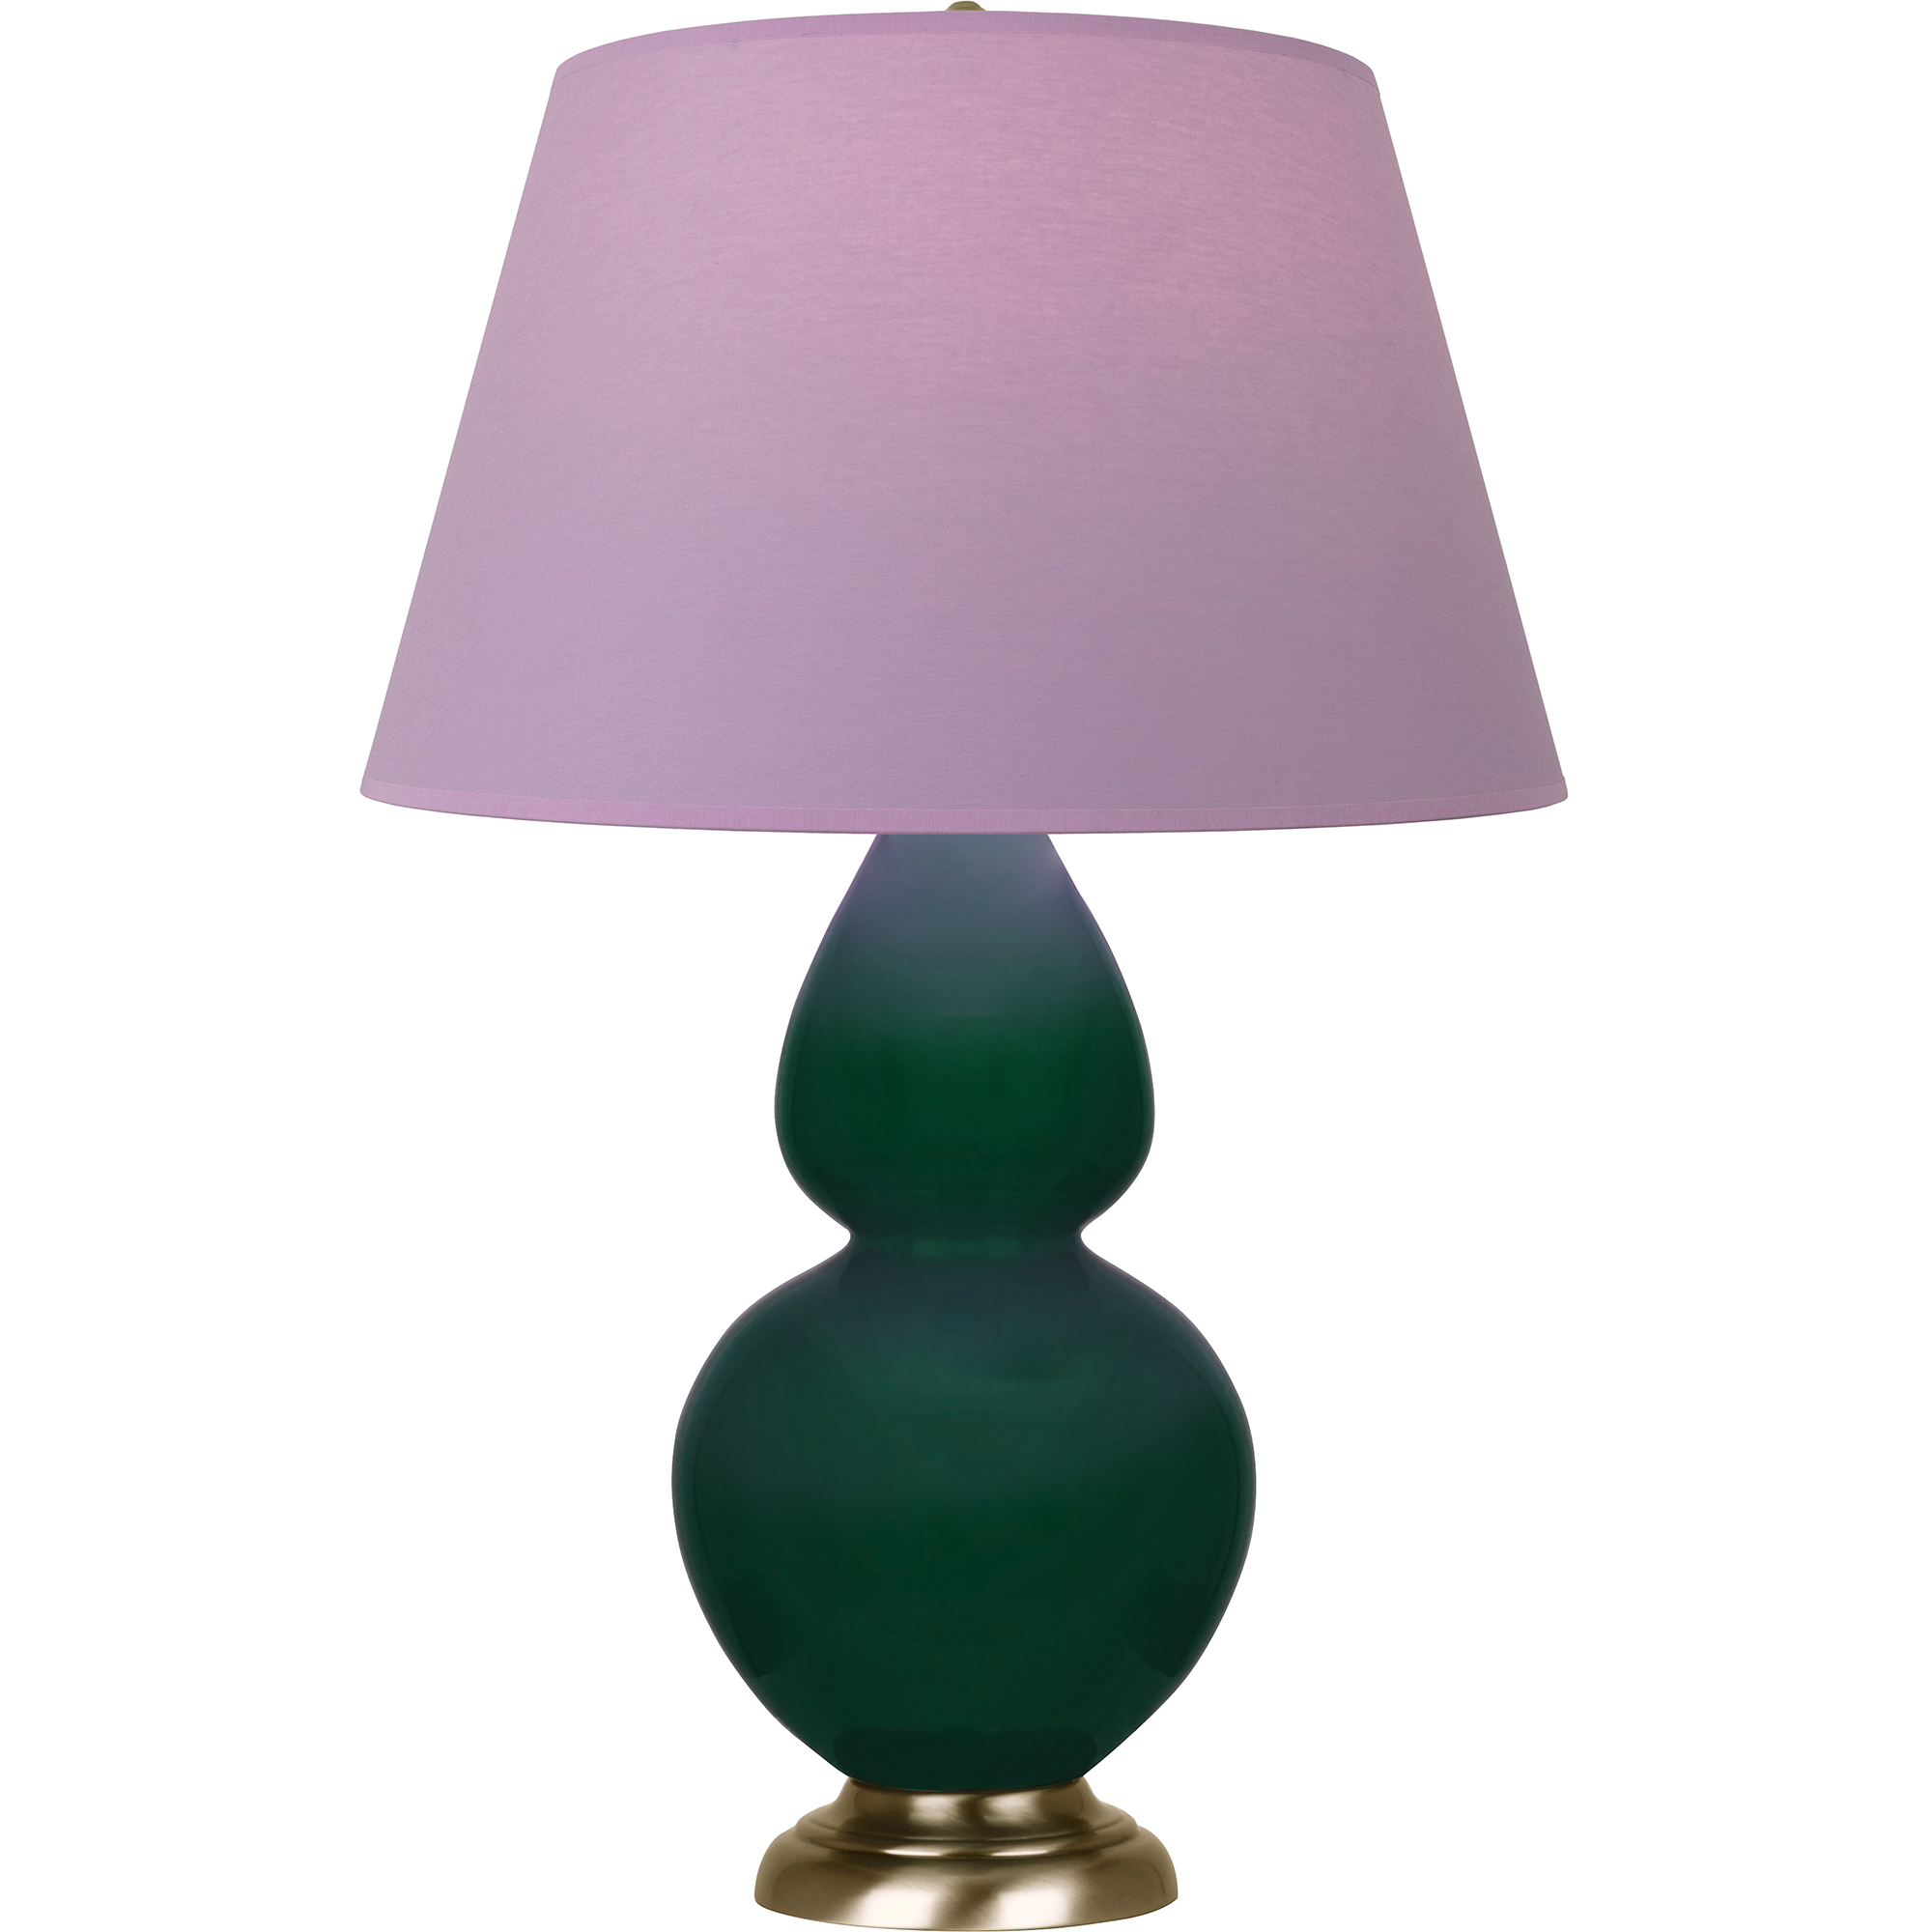 Double Gourd Table Lamp Style #JU20L